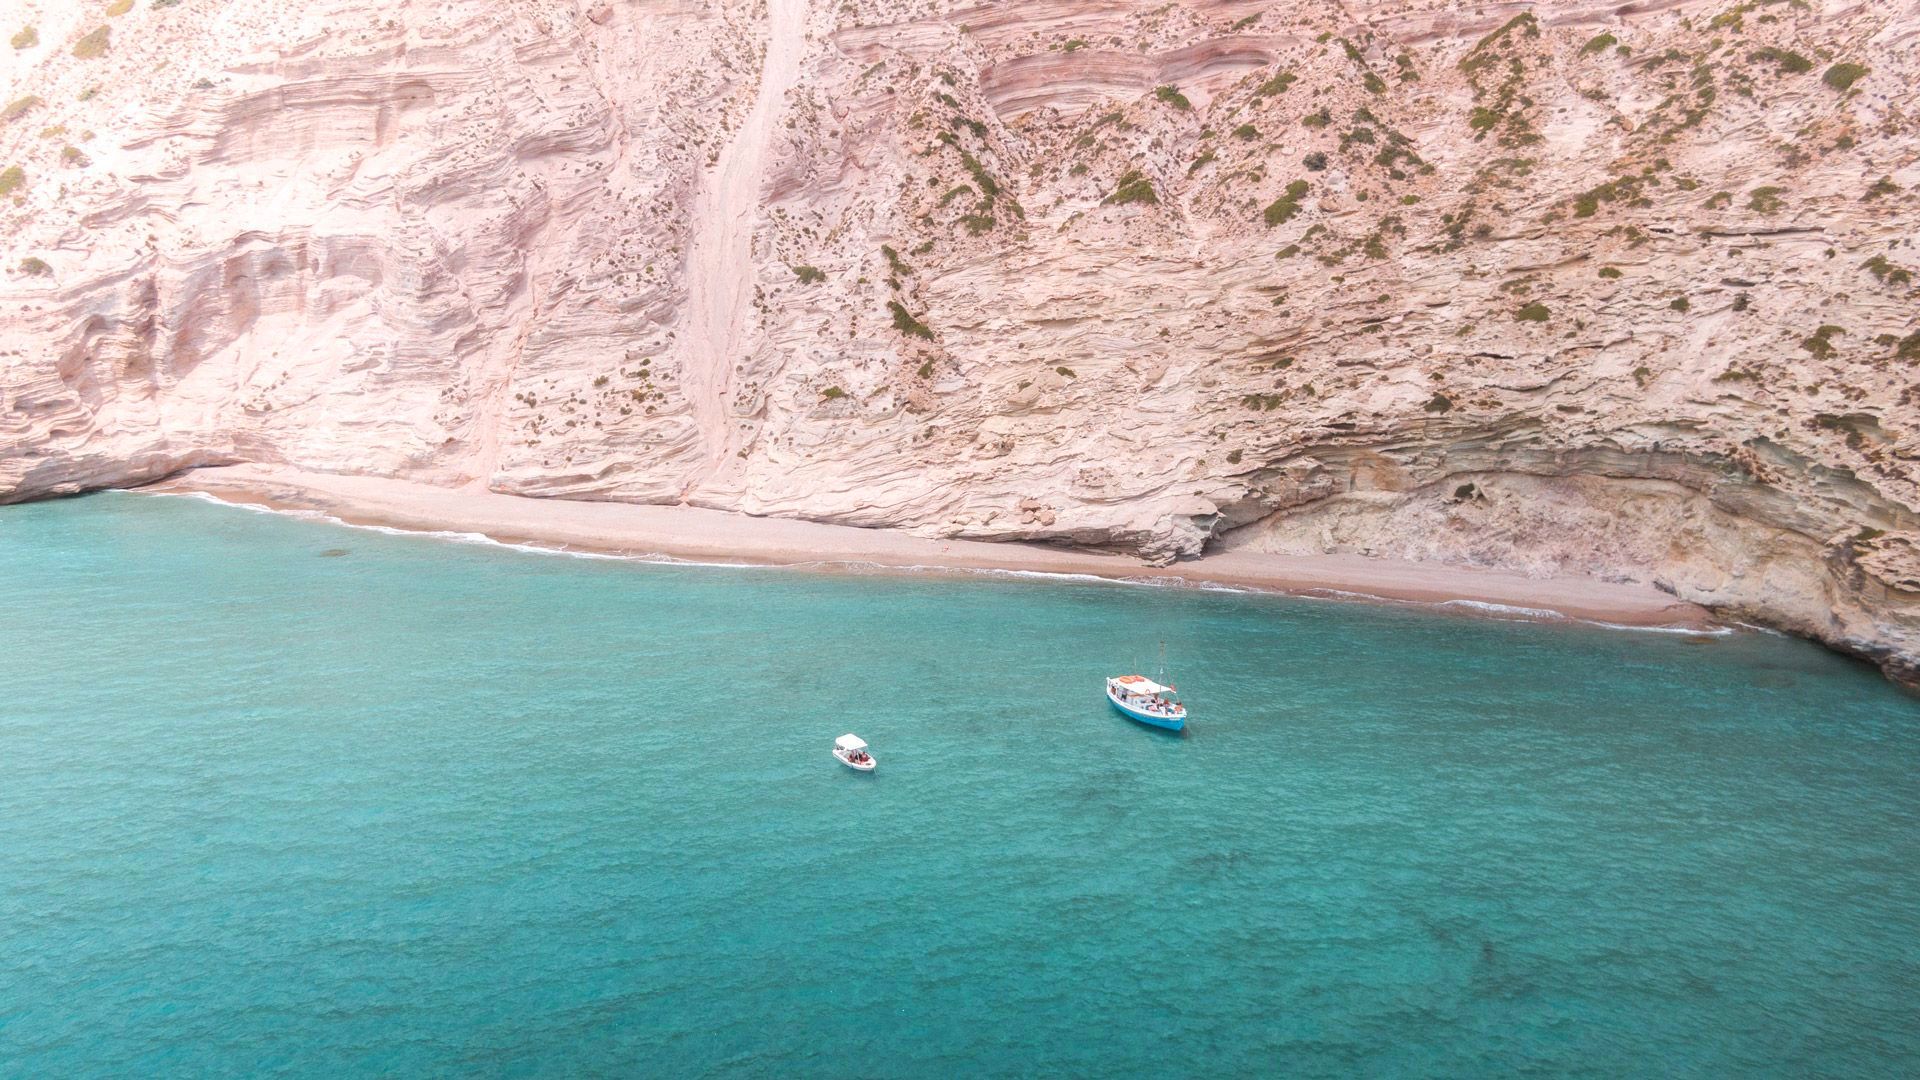 Milos Private Boat Cruise to Sykia, Kleftiko, Tsigrado & Gerakas. Get to know the most beautiful beaches of Milos in a full-day cruise!